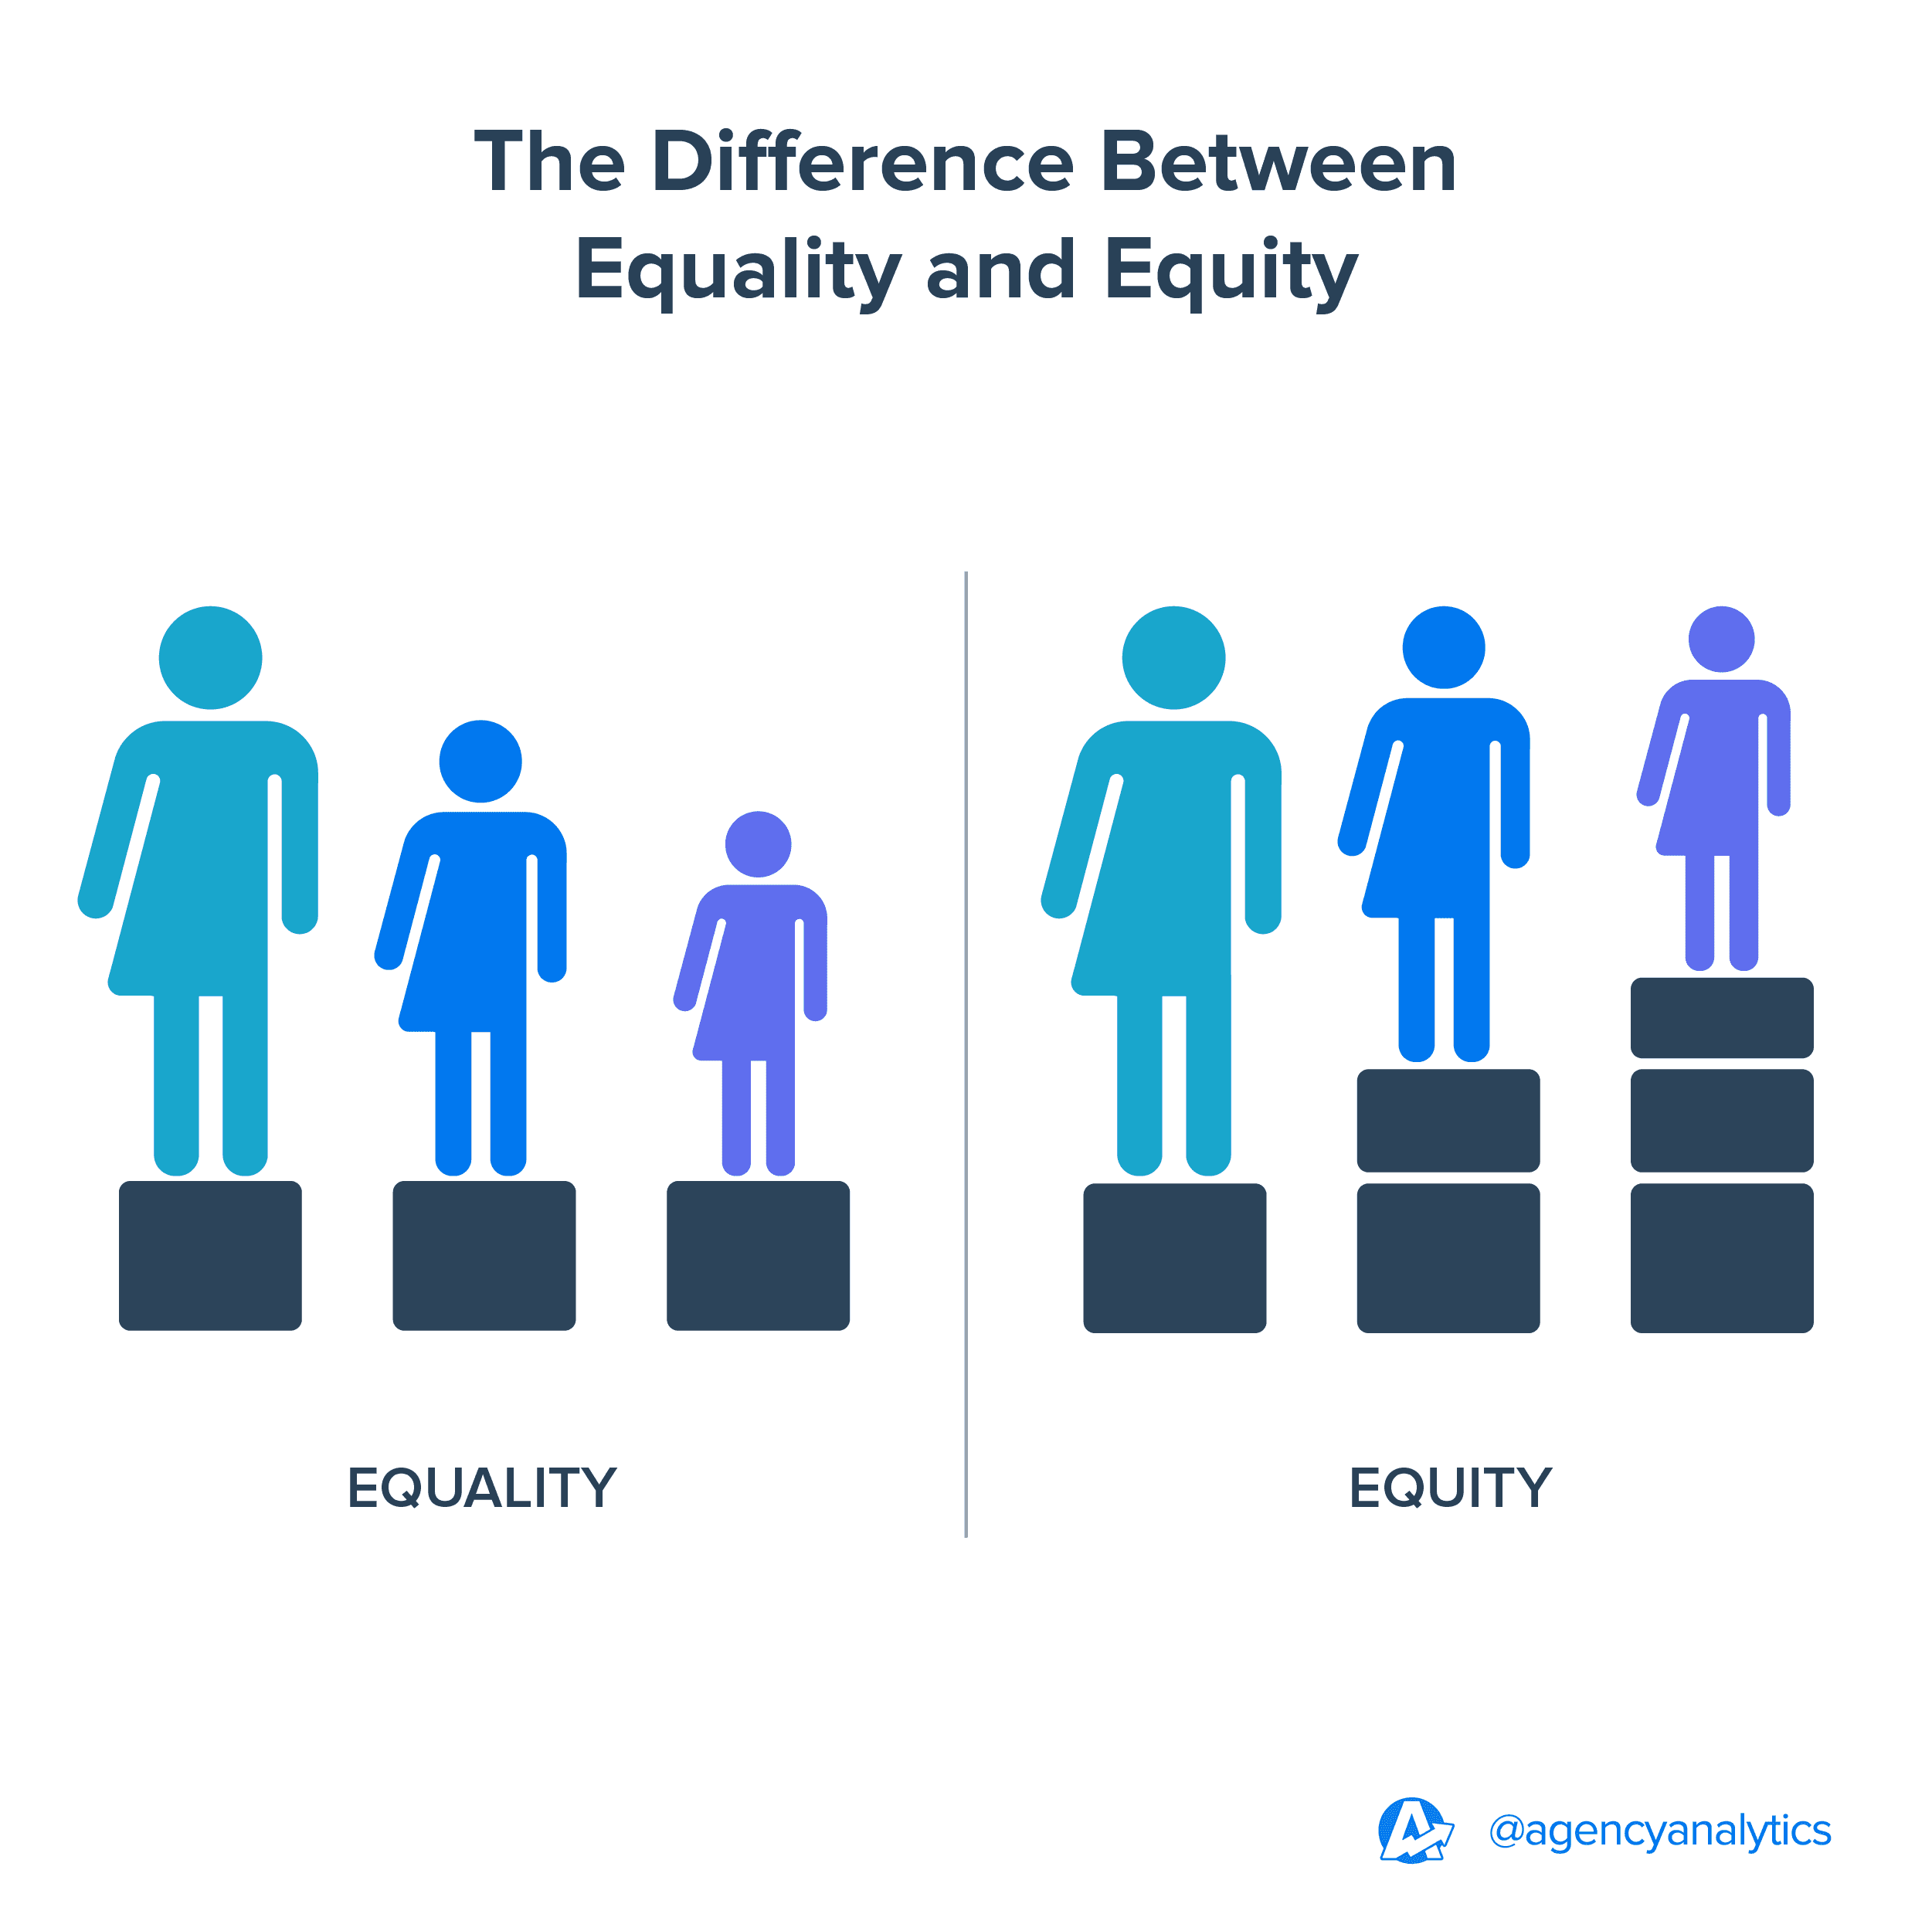 equality vs equity graphic example